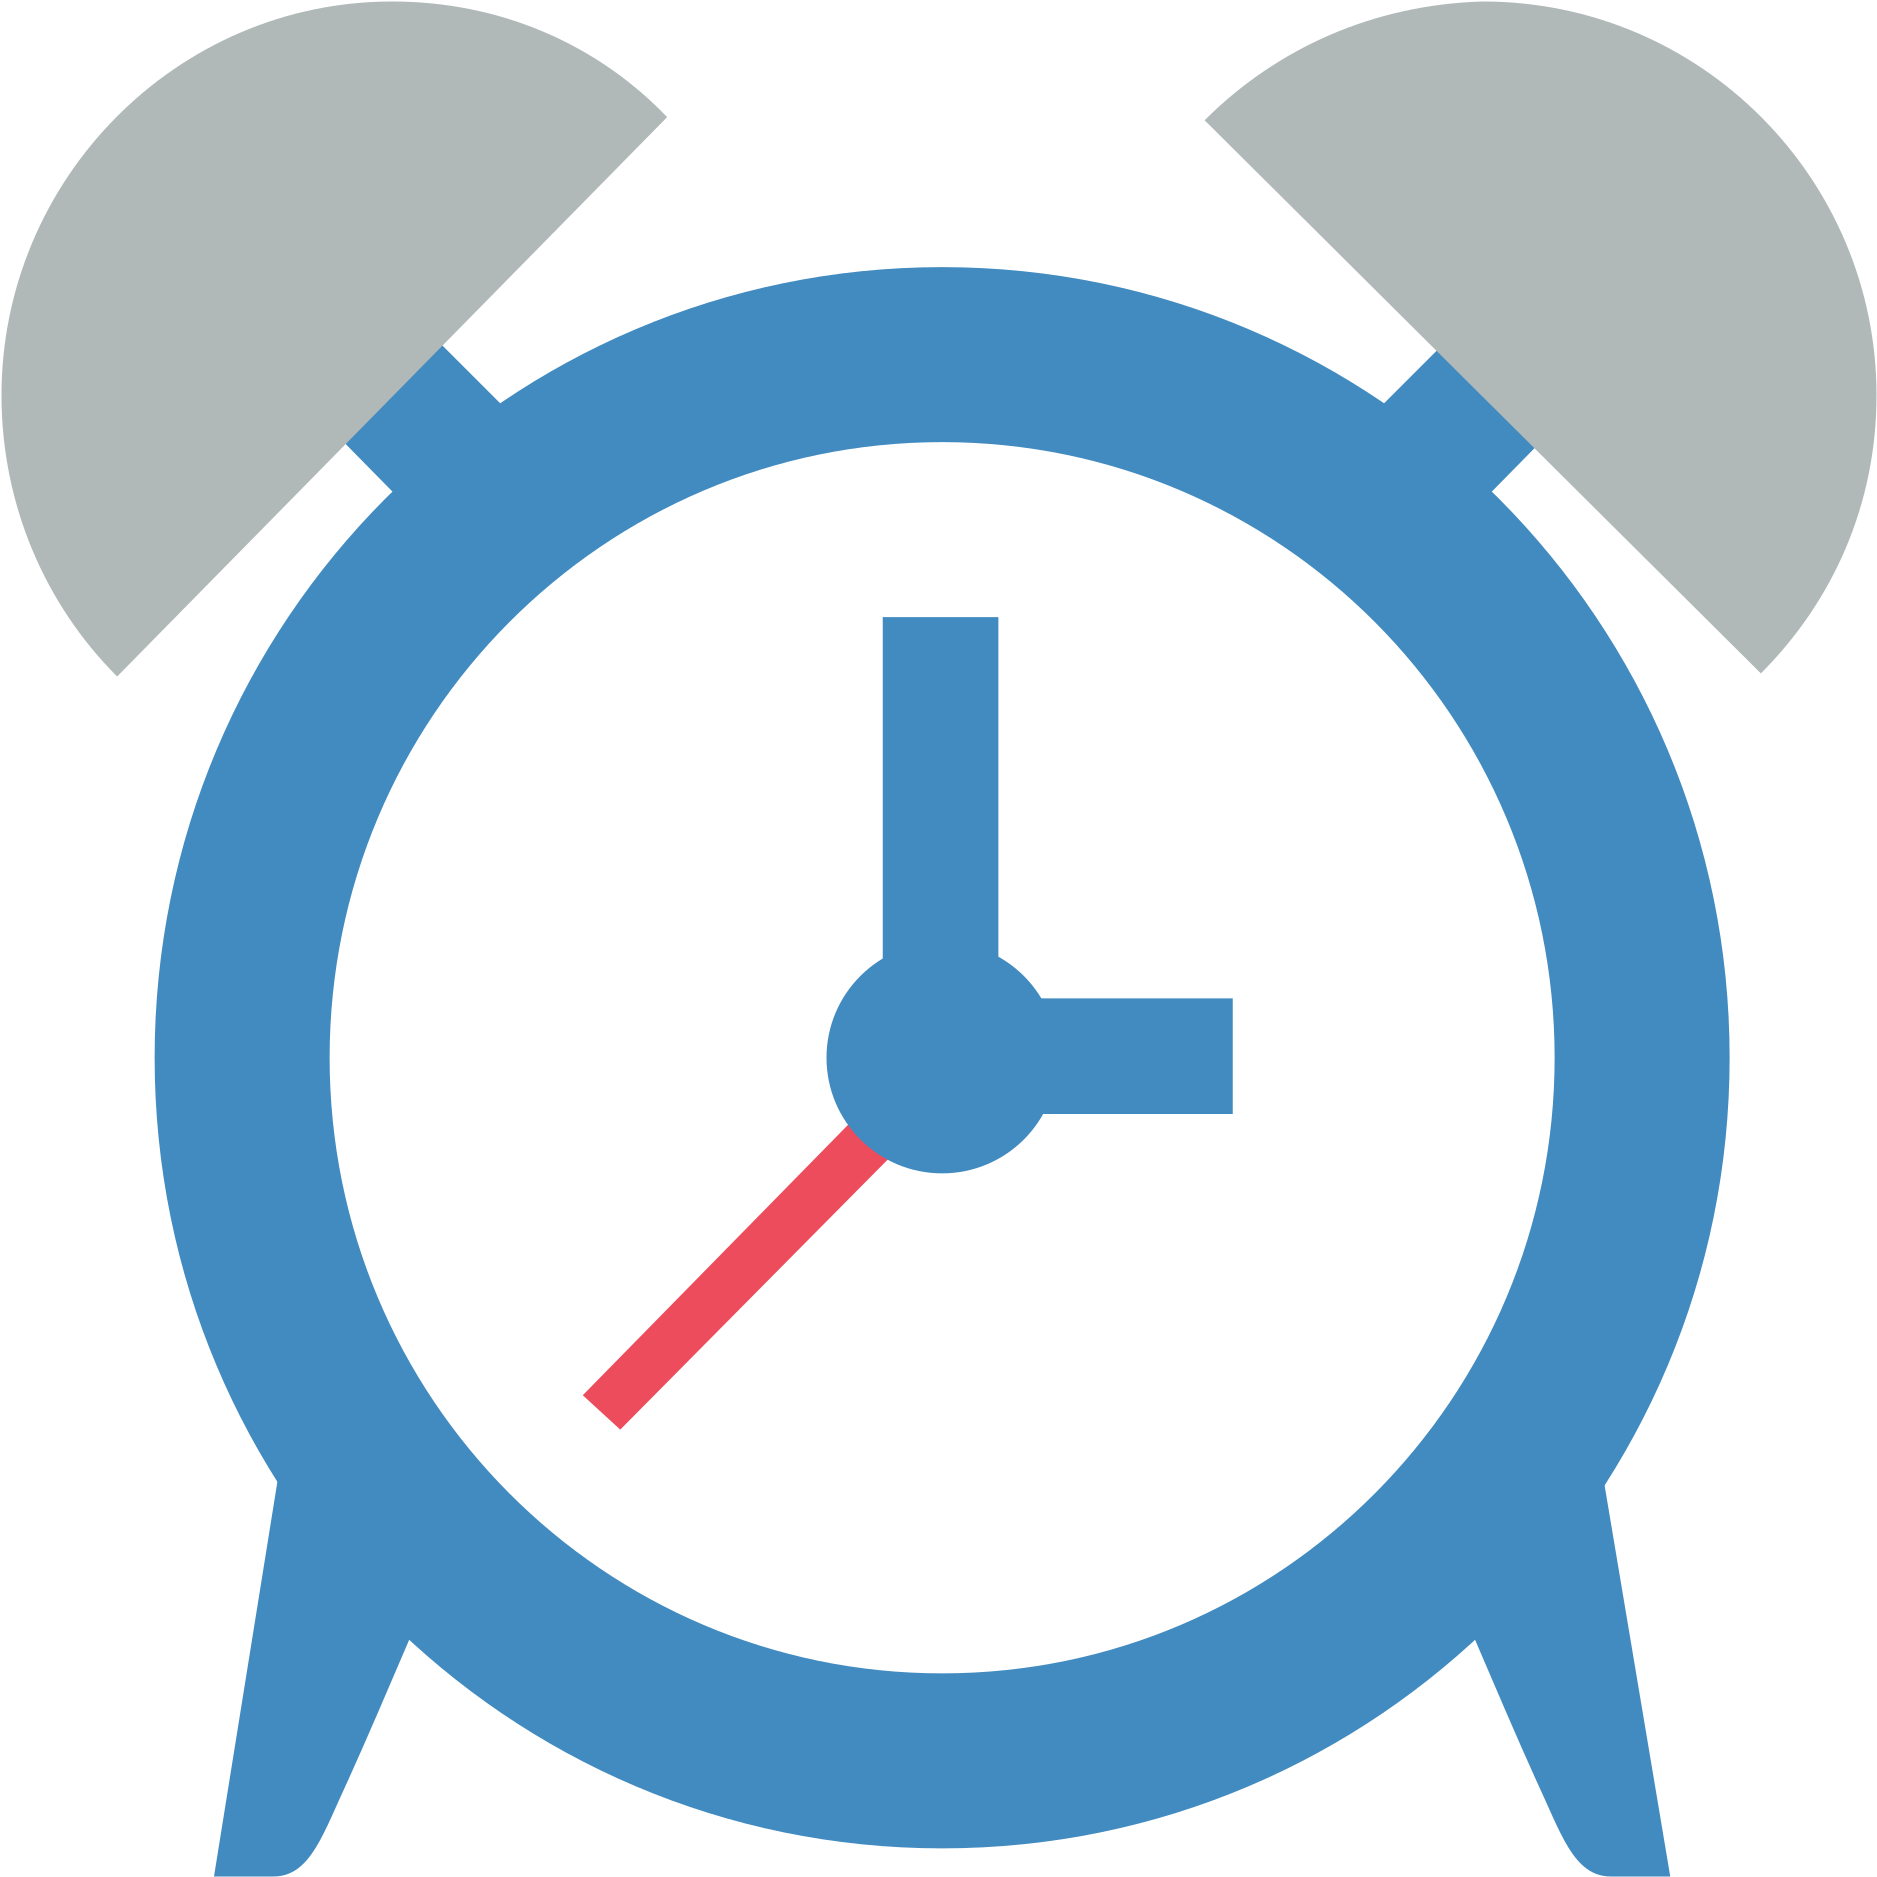 Blue Alarm Clock White Face PNG